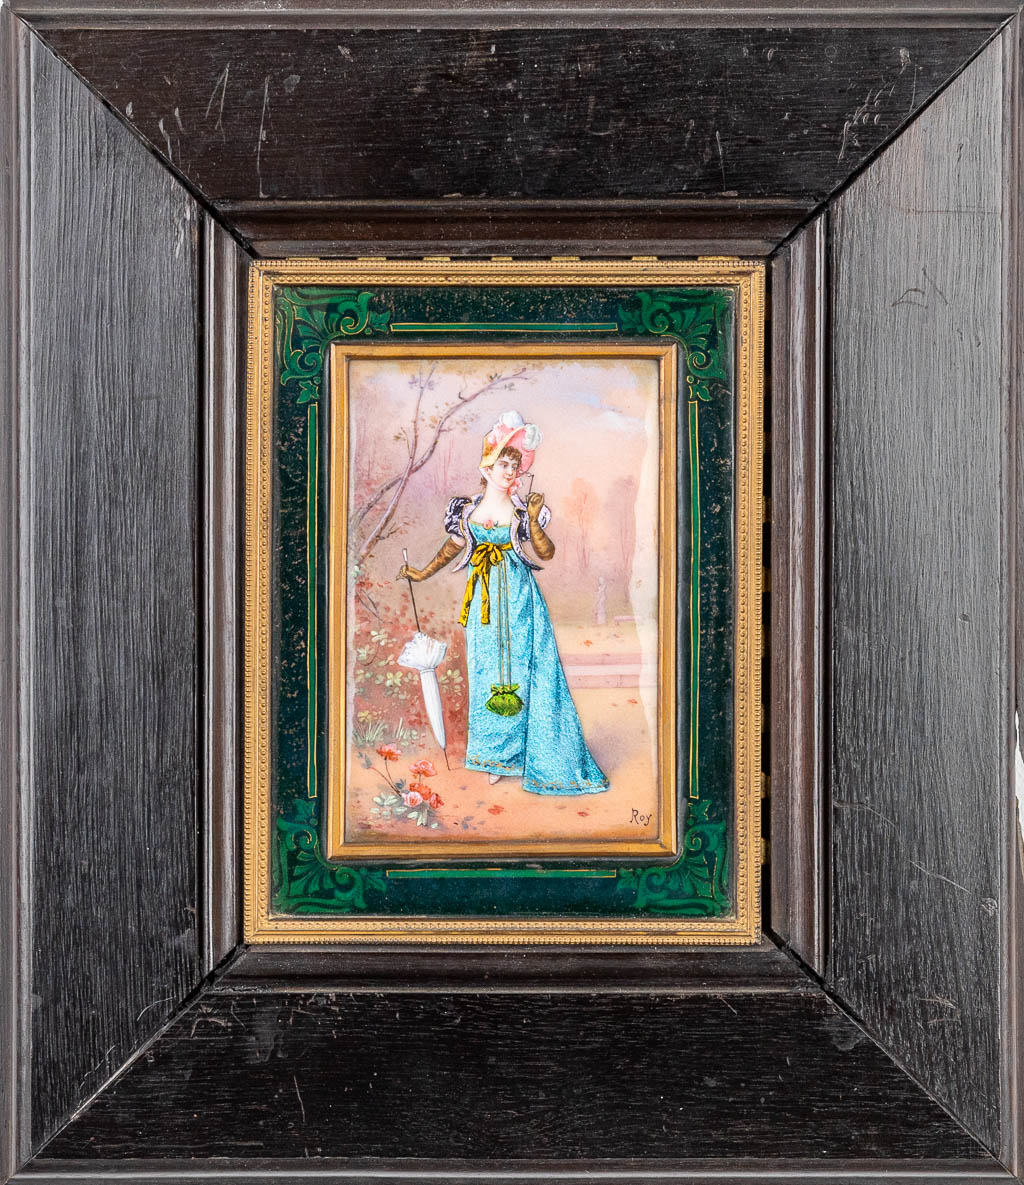 A pair of hand-painted enamel plaques mounted in ebonised wood frames, marked Roy. (H:15,5cm)